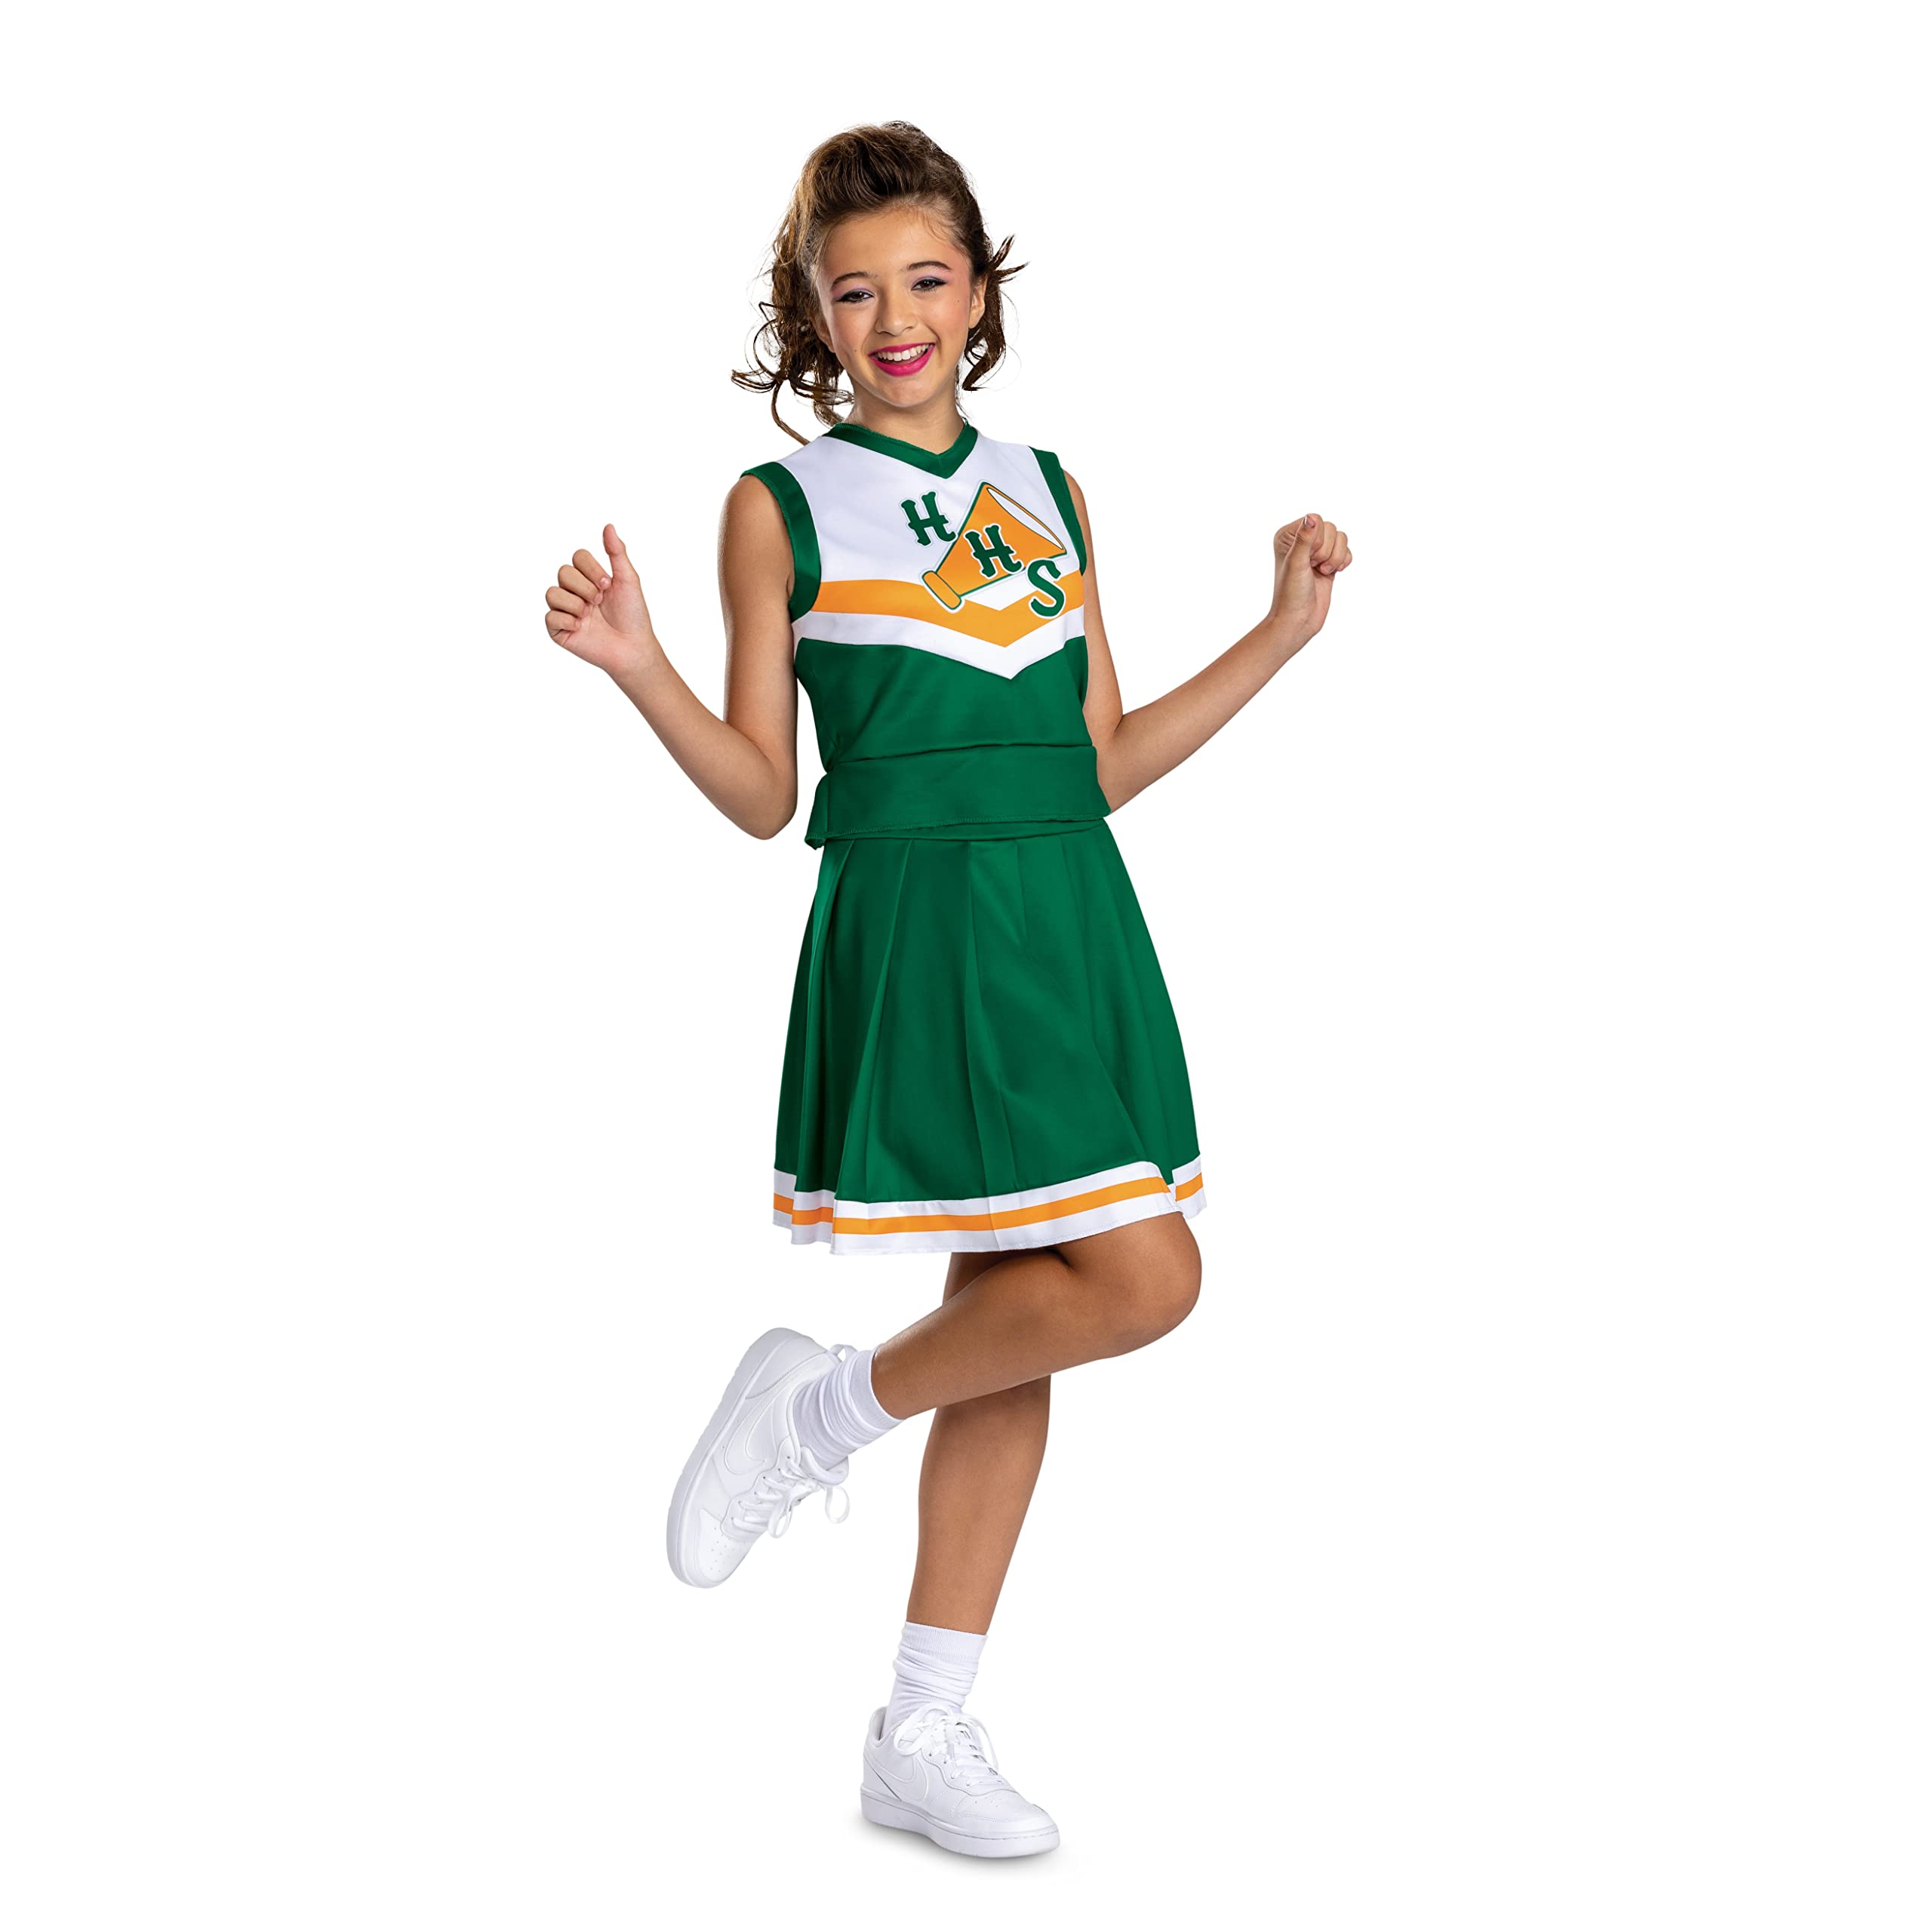 Disguise Hawkins Tigers Cheerleader Costume for Kids Official Stranger Things Costume Outfit Child Size Large 10-12